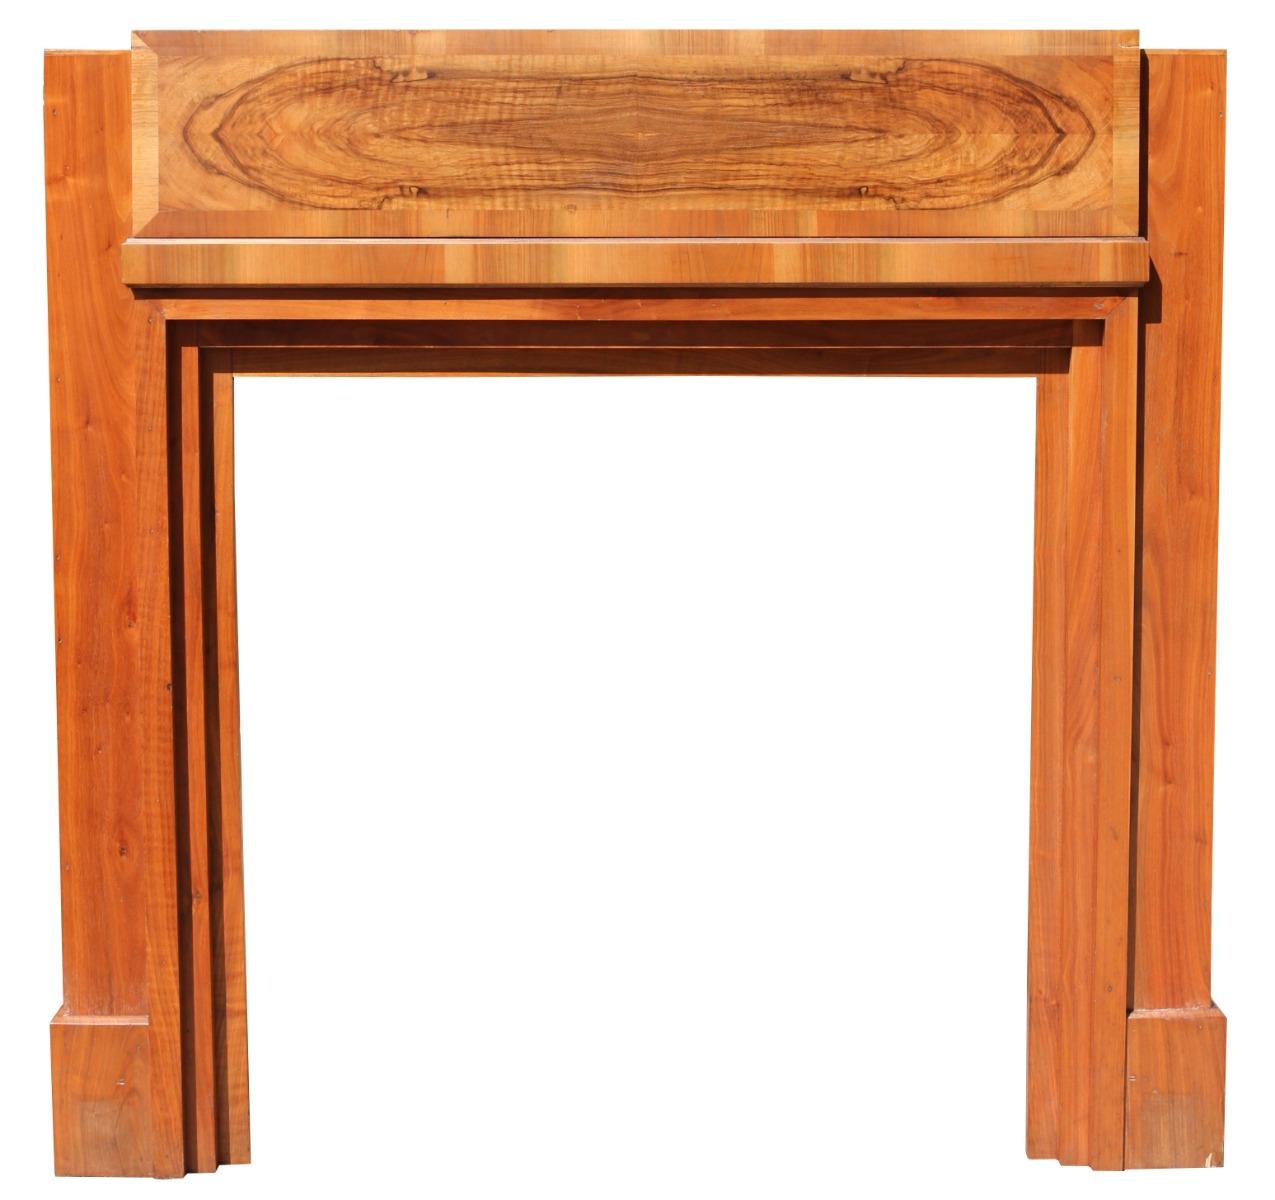 Art Deco Period Burr Walnut Mantel In Good Condition For Sale In Wormelow, Herefordshire